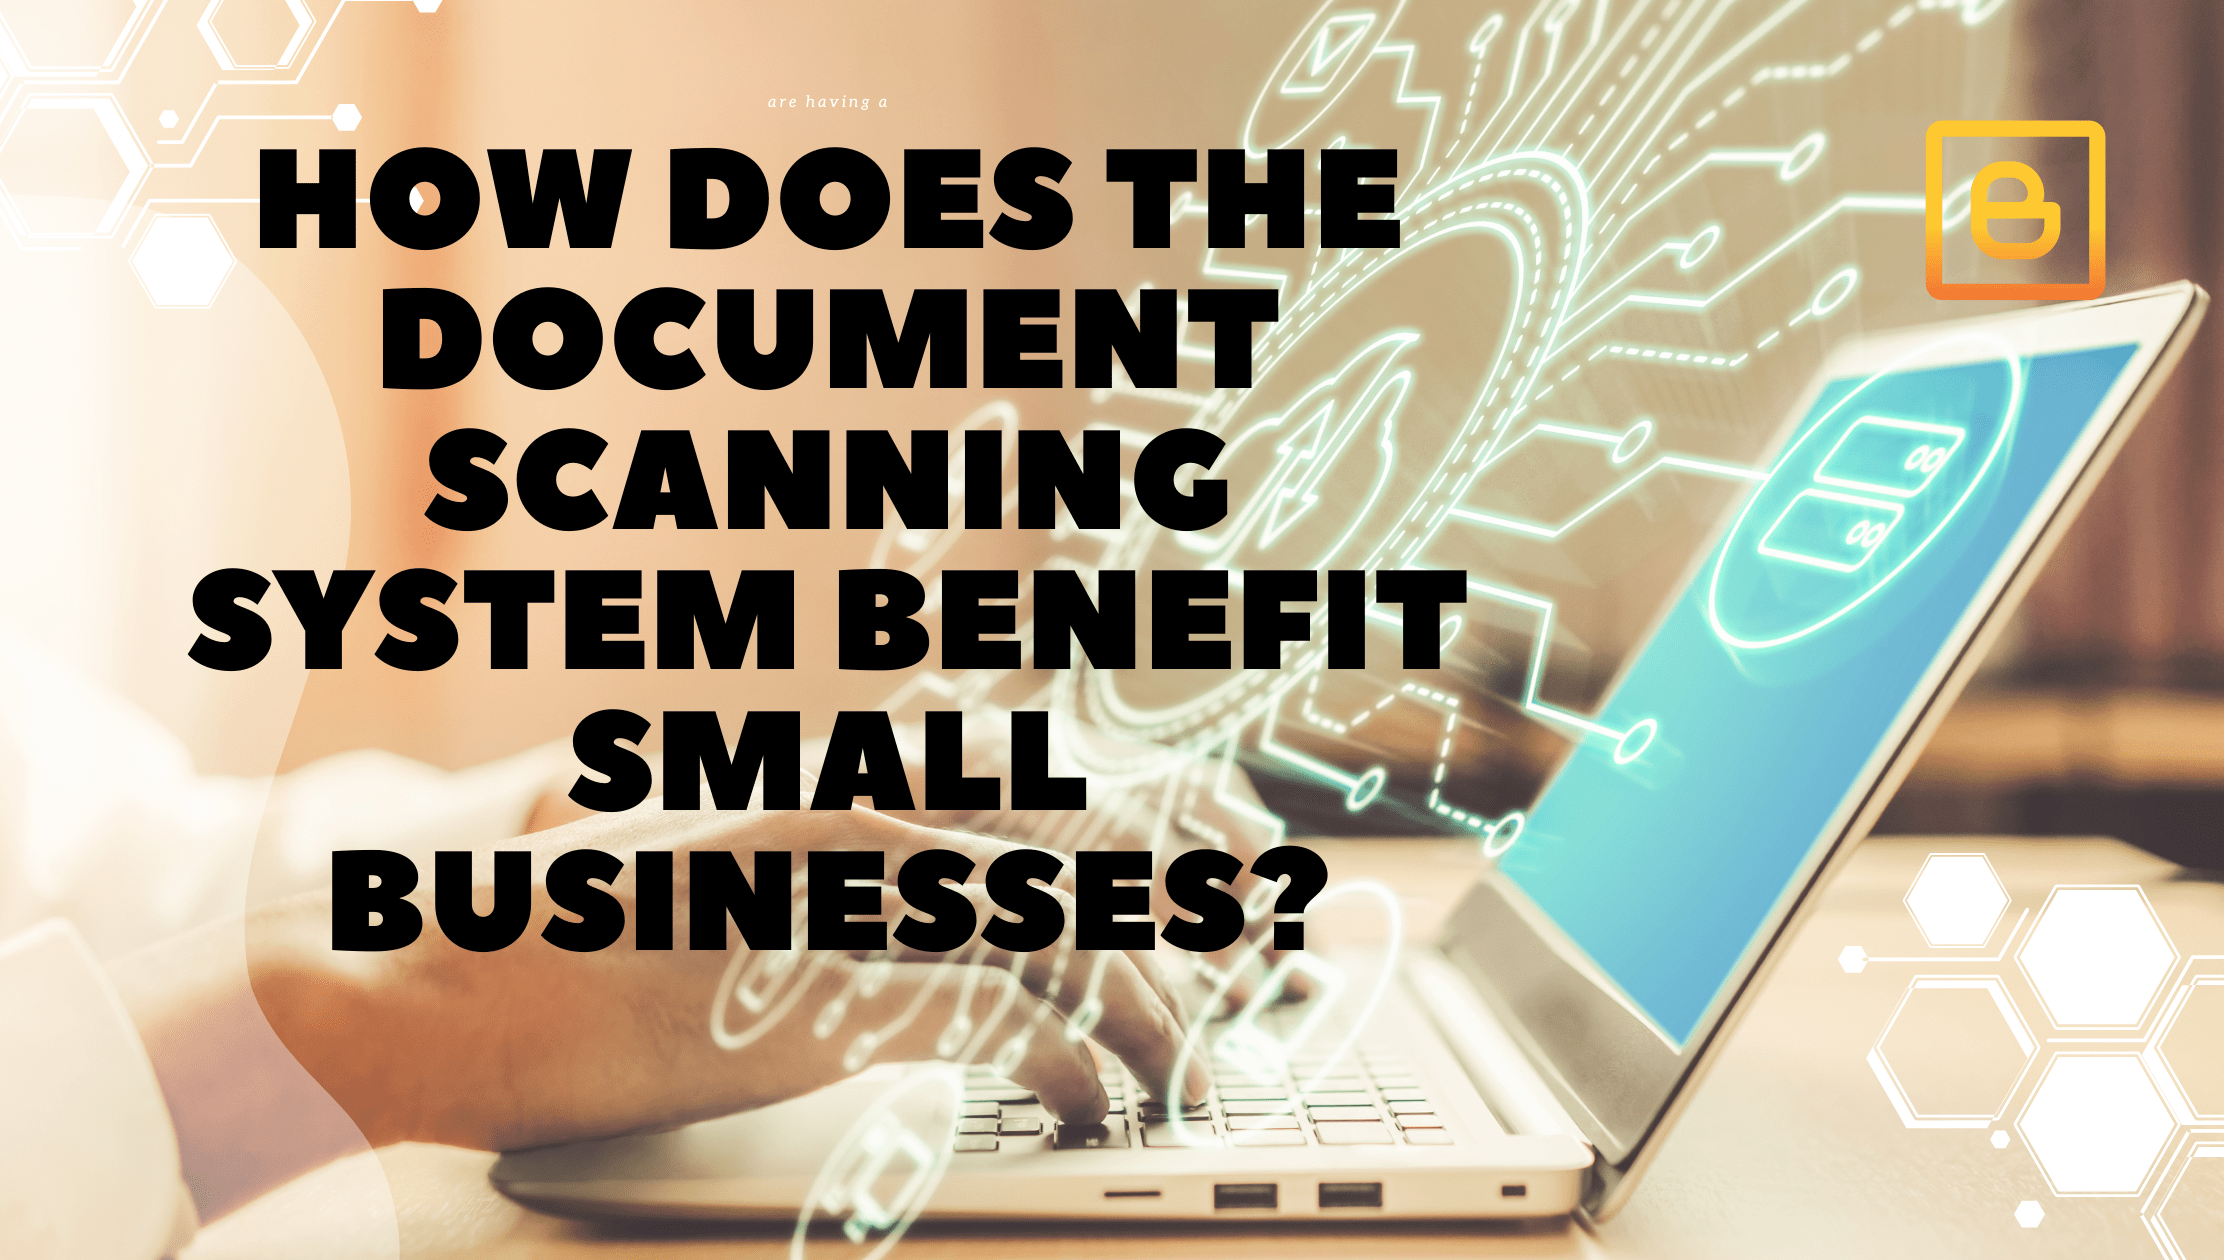 How does the Document Scanning System benefit Small Businesses?